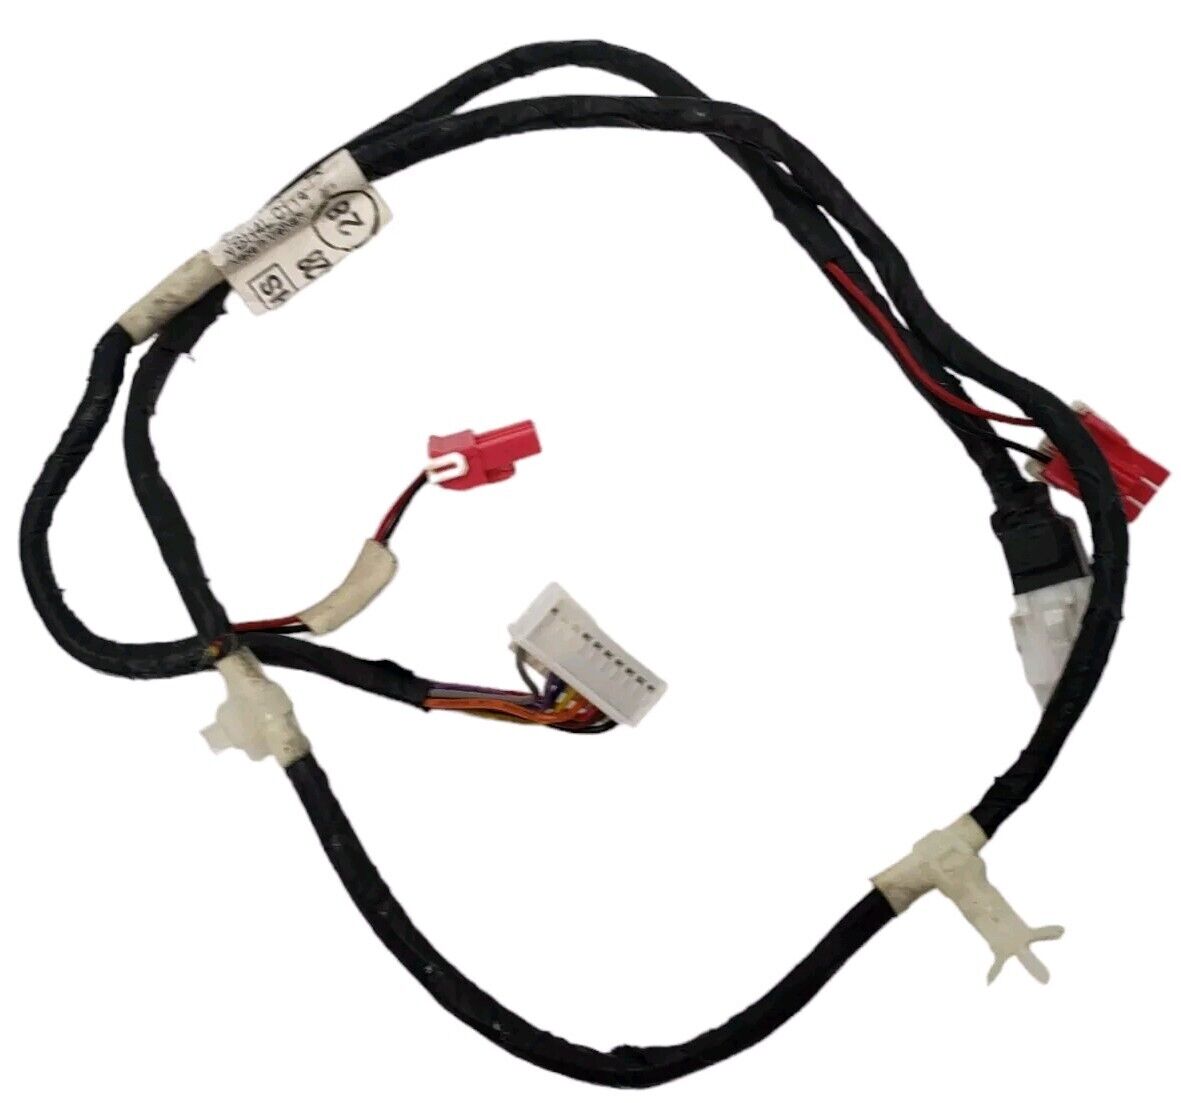 OEM Replacement for LG Washer Harness EAD61212328